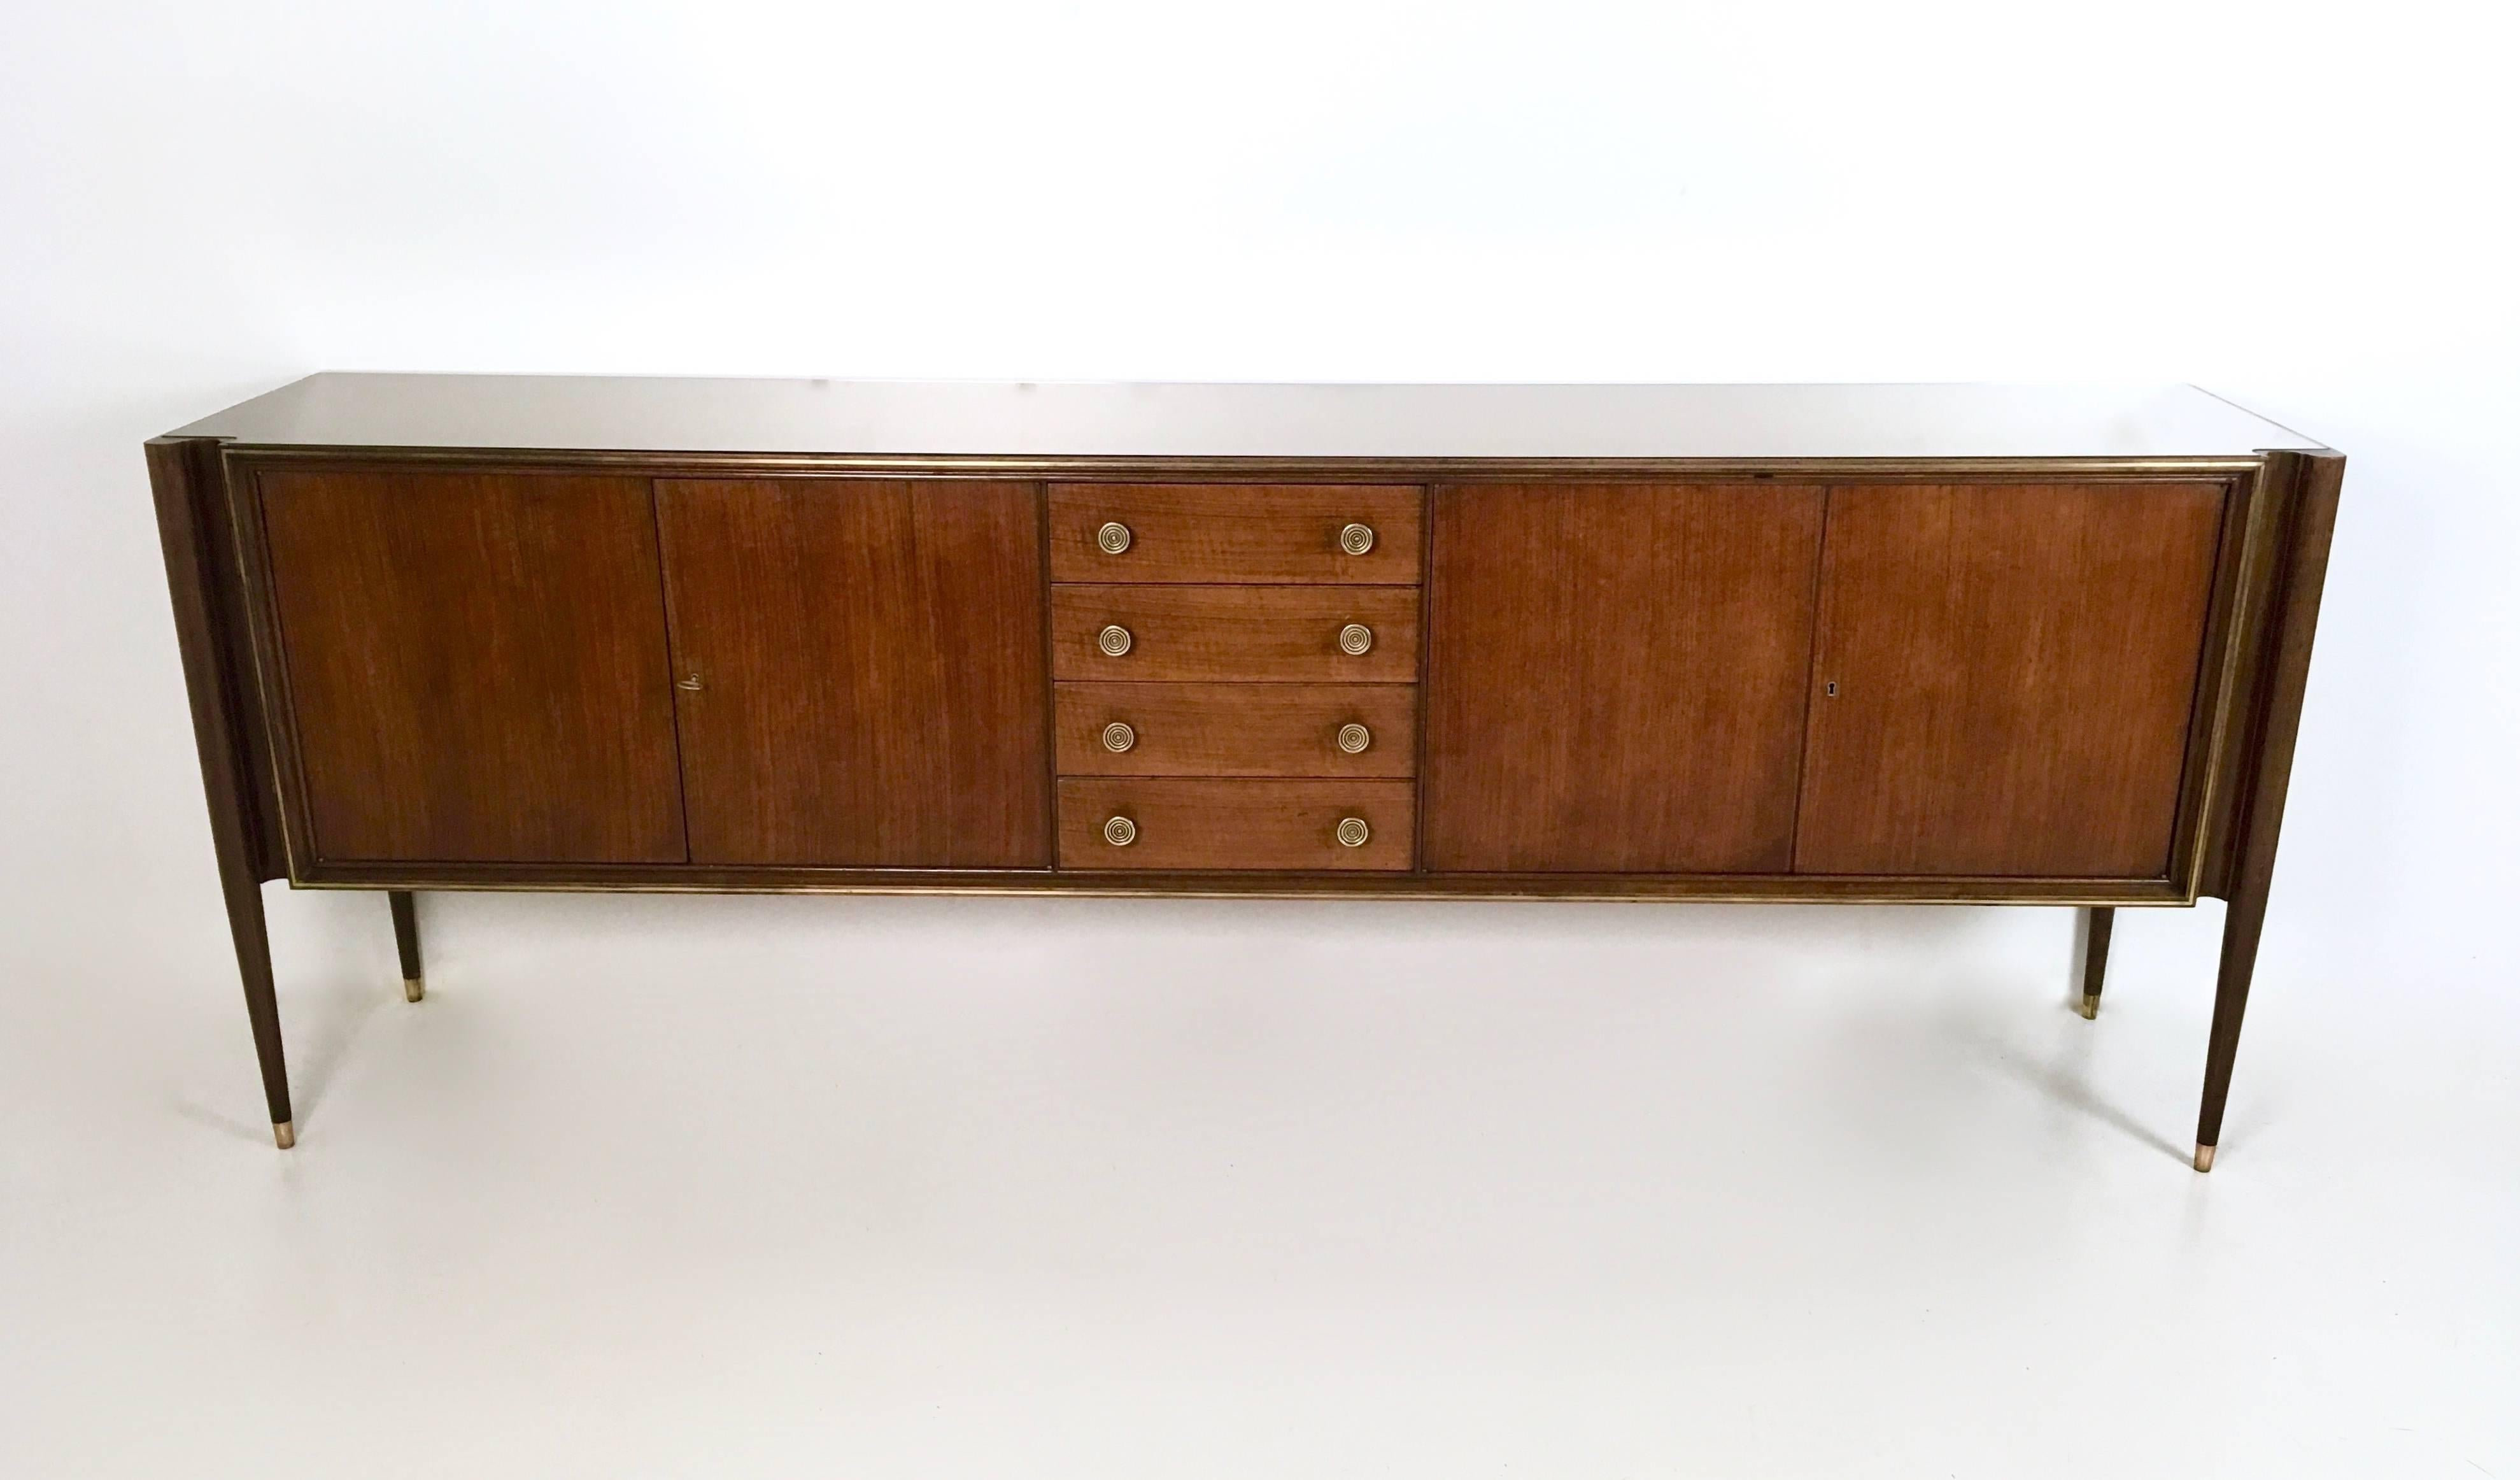 It has a mirrored top.
Made from walnut and brass.
There is a similar model which is by Borsani. 
It is in excellent condition. 

             